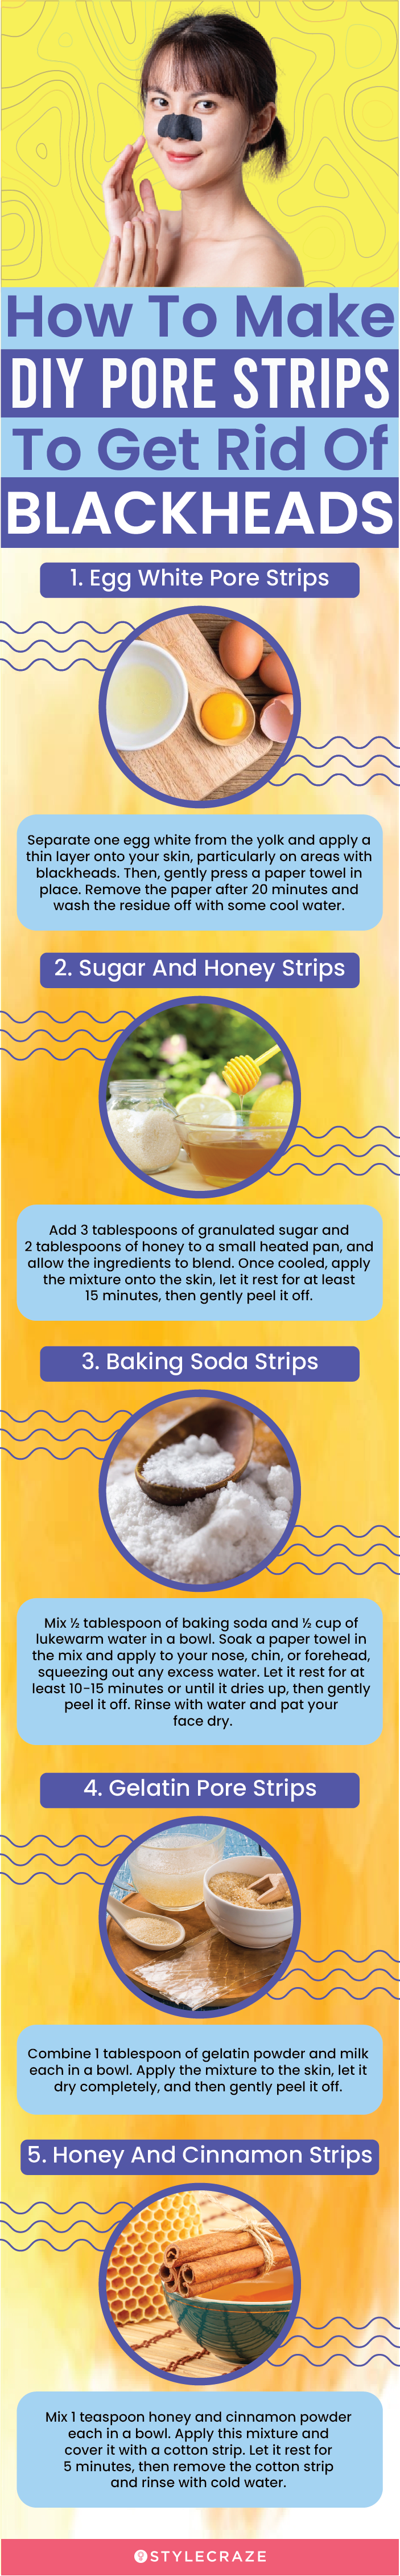 how to make diy pore strips to get rid of black heads (infographic)